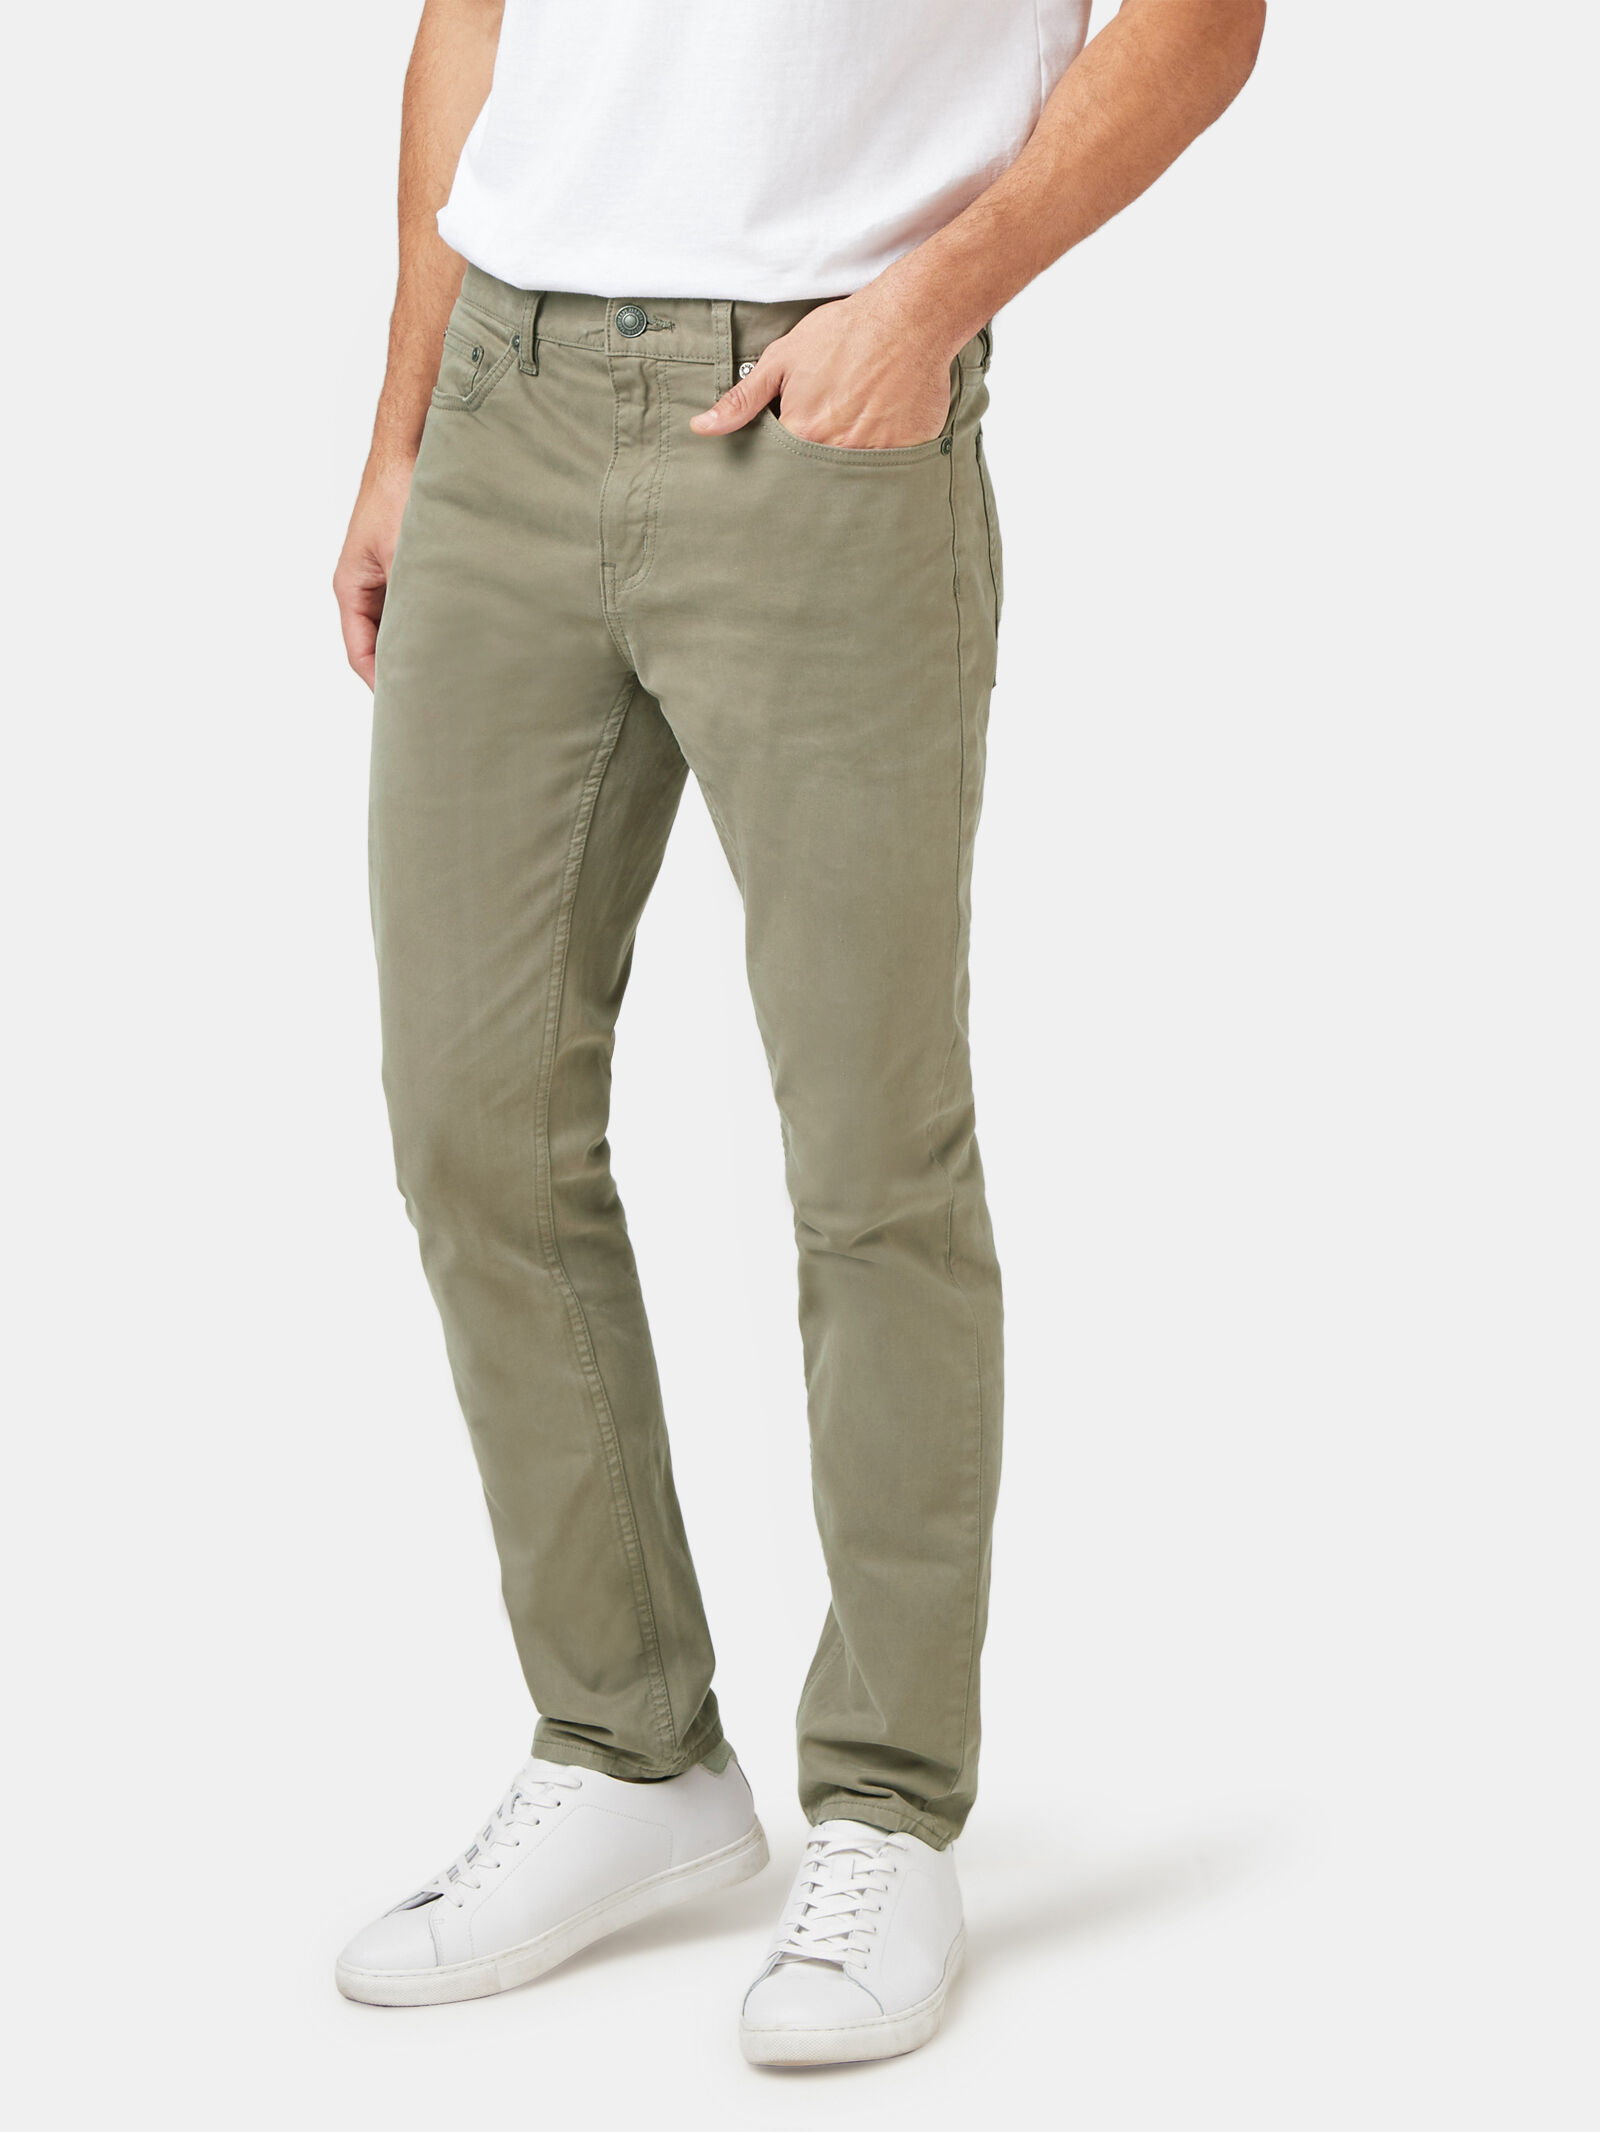 US Polo Assn Denim Co Jeans  Buy US Polo Assn Denim Co Men Olive  Brandon Slim Tapered Fit Clean Look Jeans Online  Nykaa Fashion